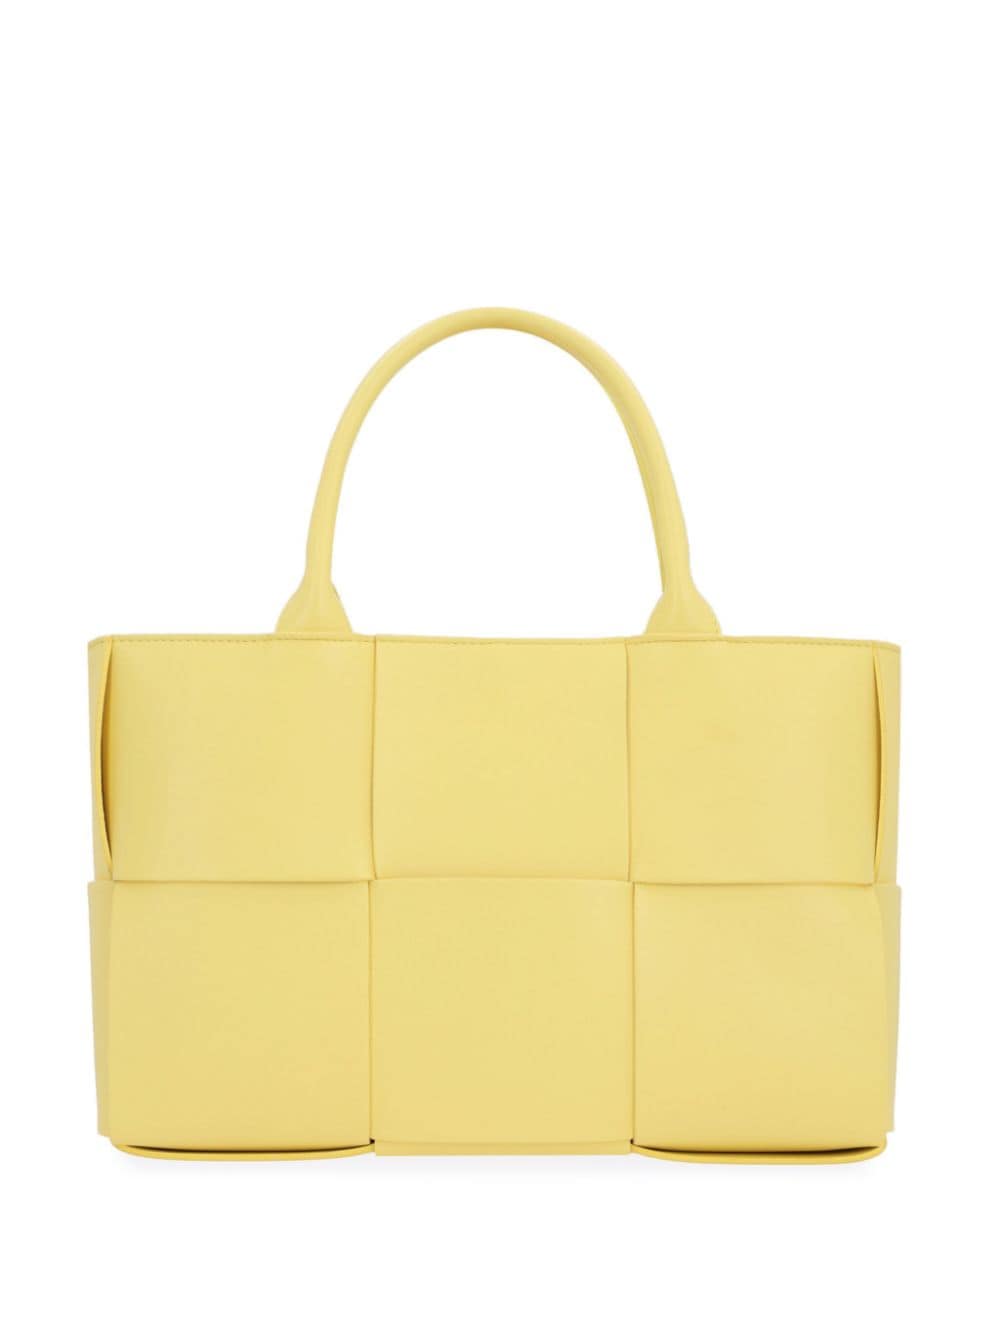 Arco leather tote bag